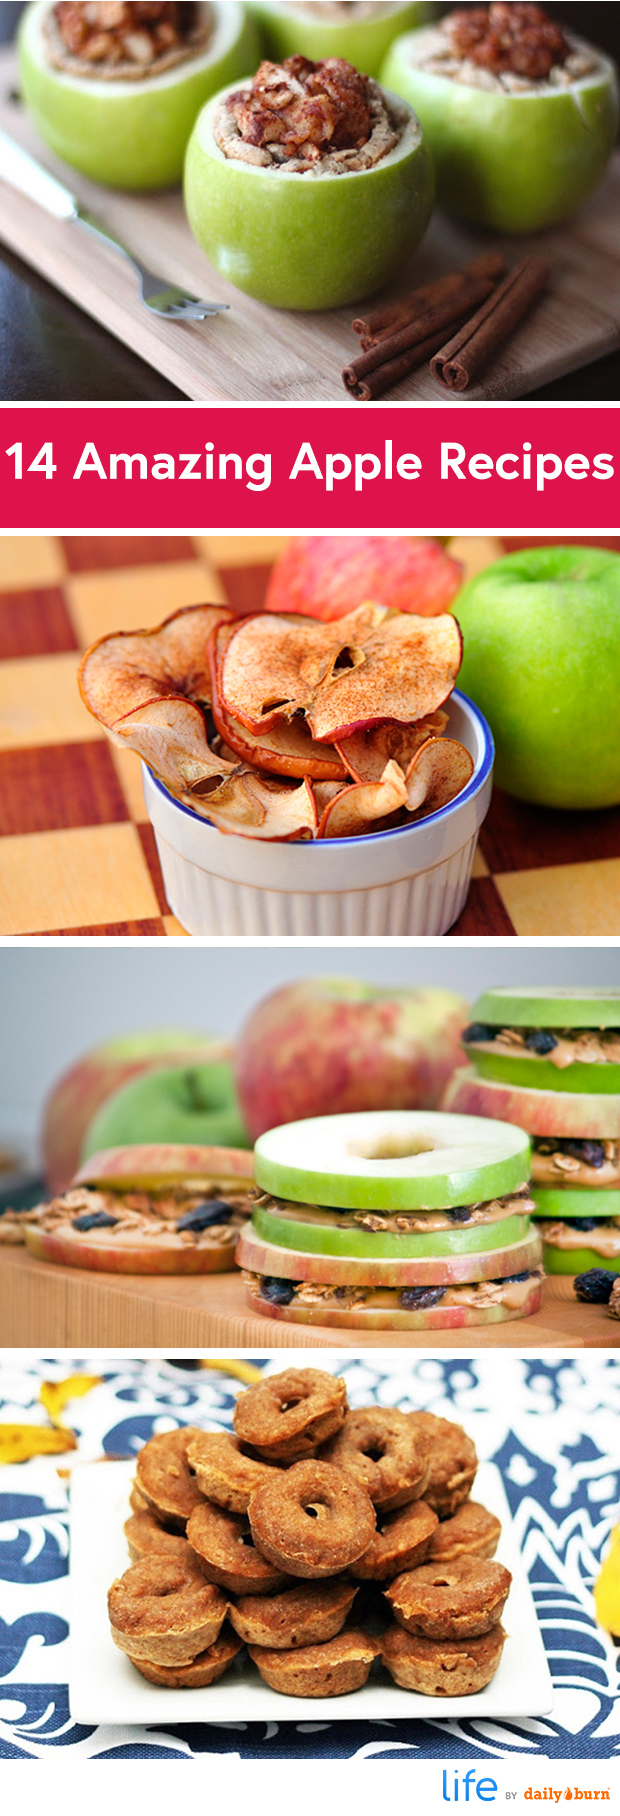 14 Amazing Apple Recipes for Fall